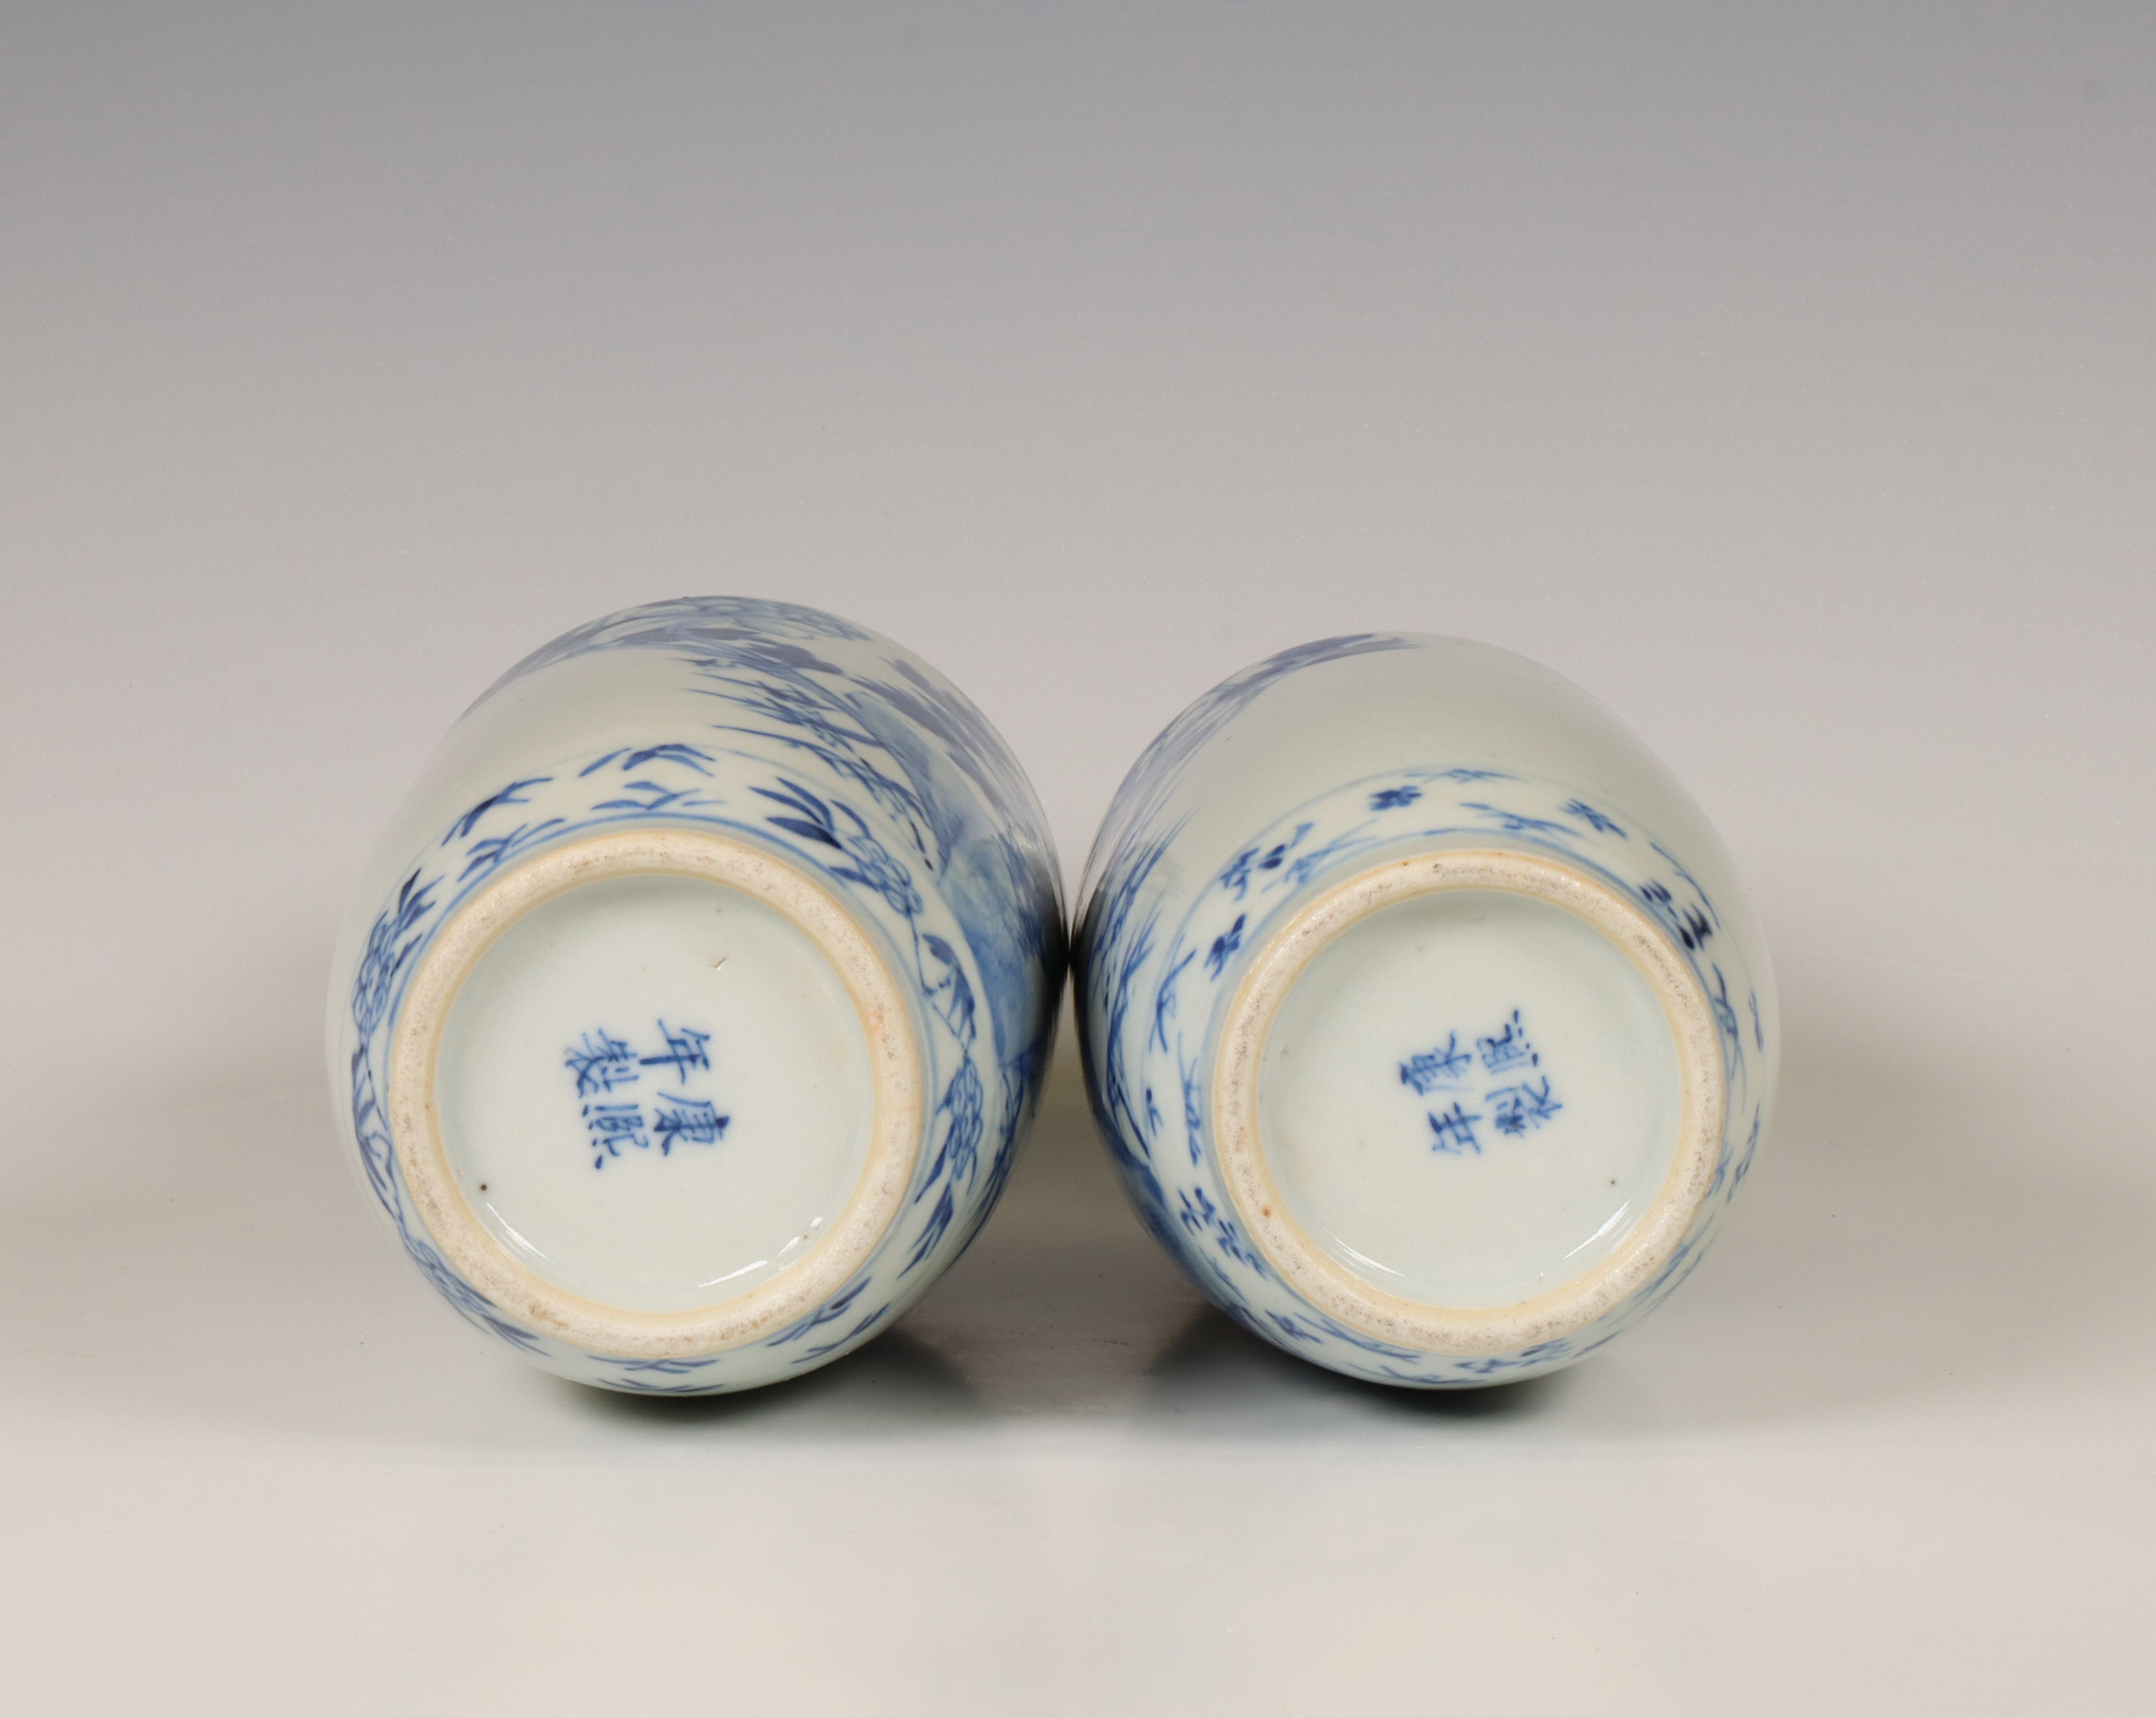 China, a pair of blue and white porcelain vases, 19th century, - Image 2 of 2